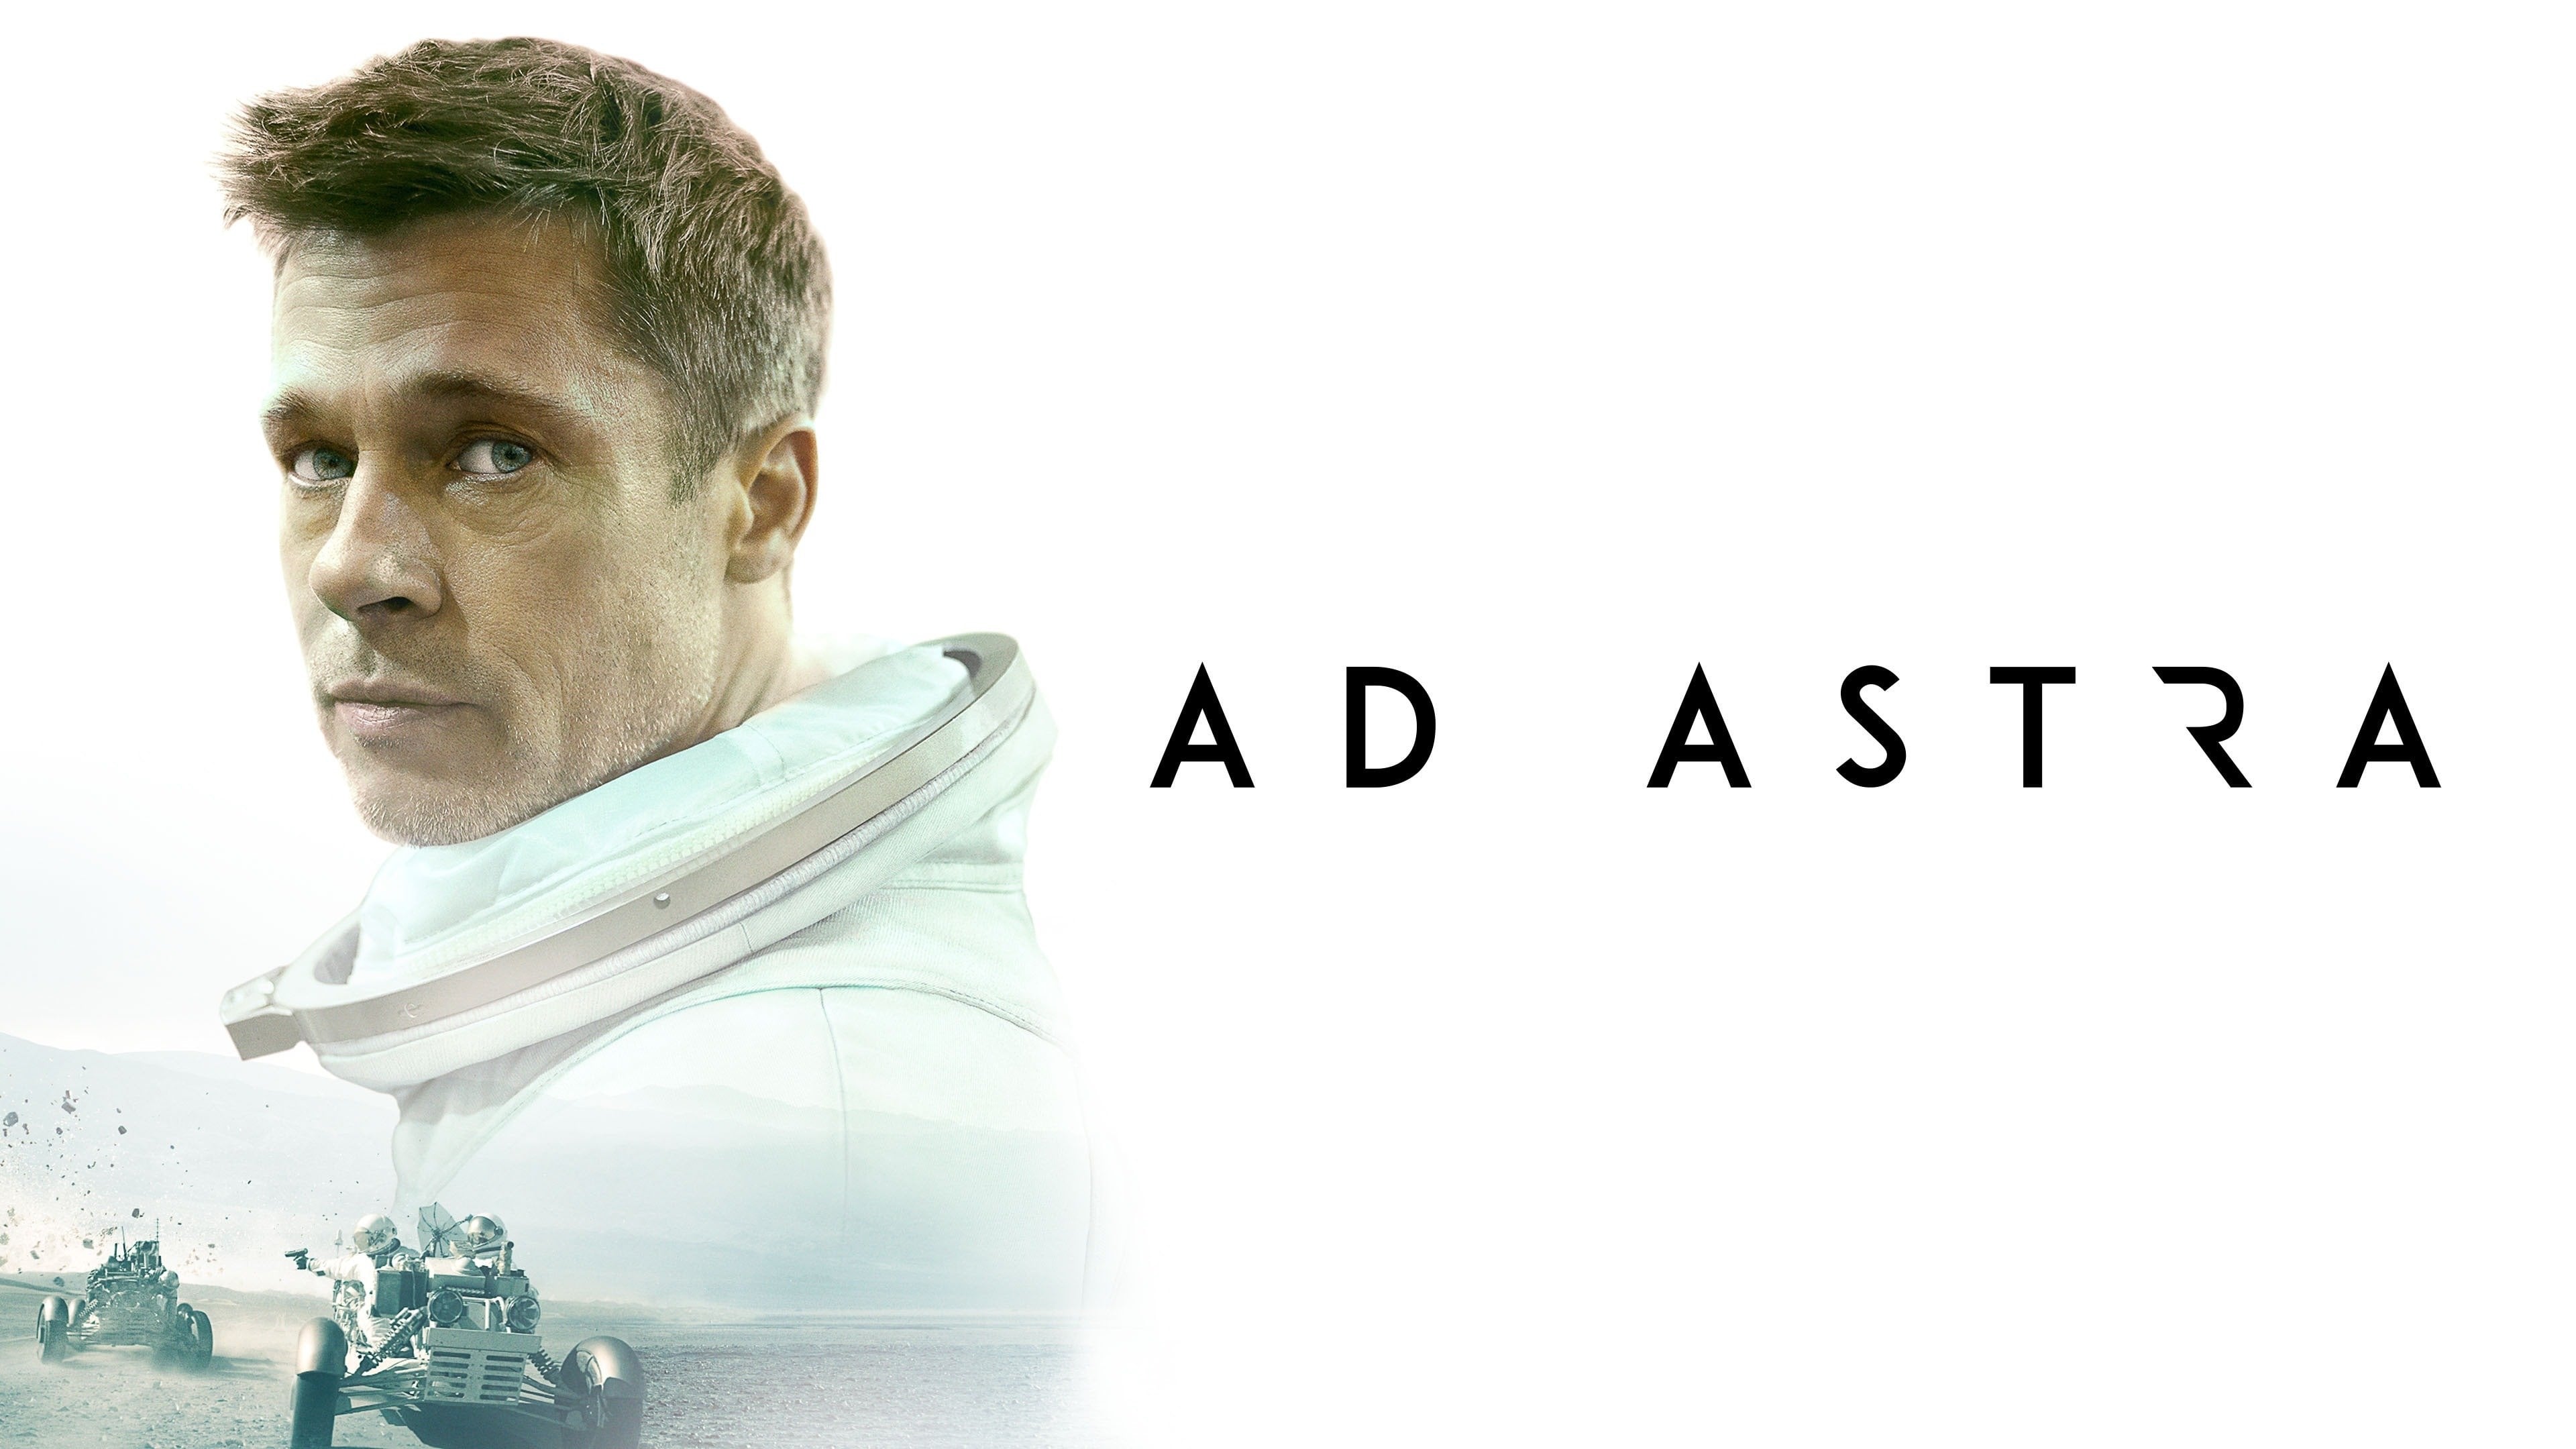 Watch Ad Astra (2019) Full Movie Online Free | Movie & TV Online HD Quality